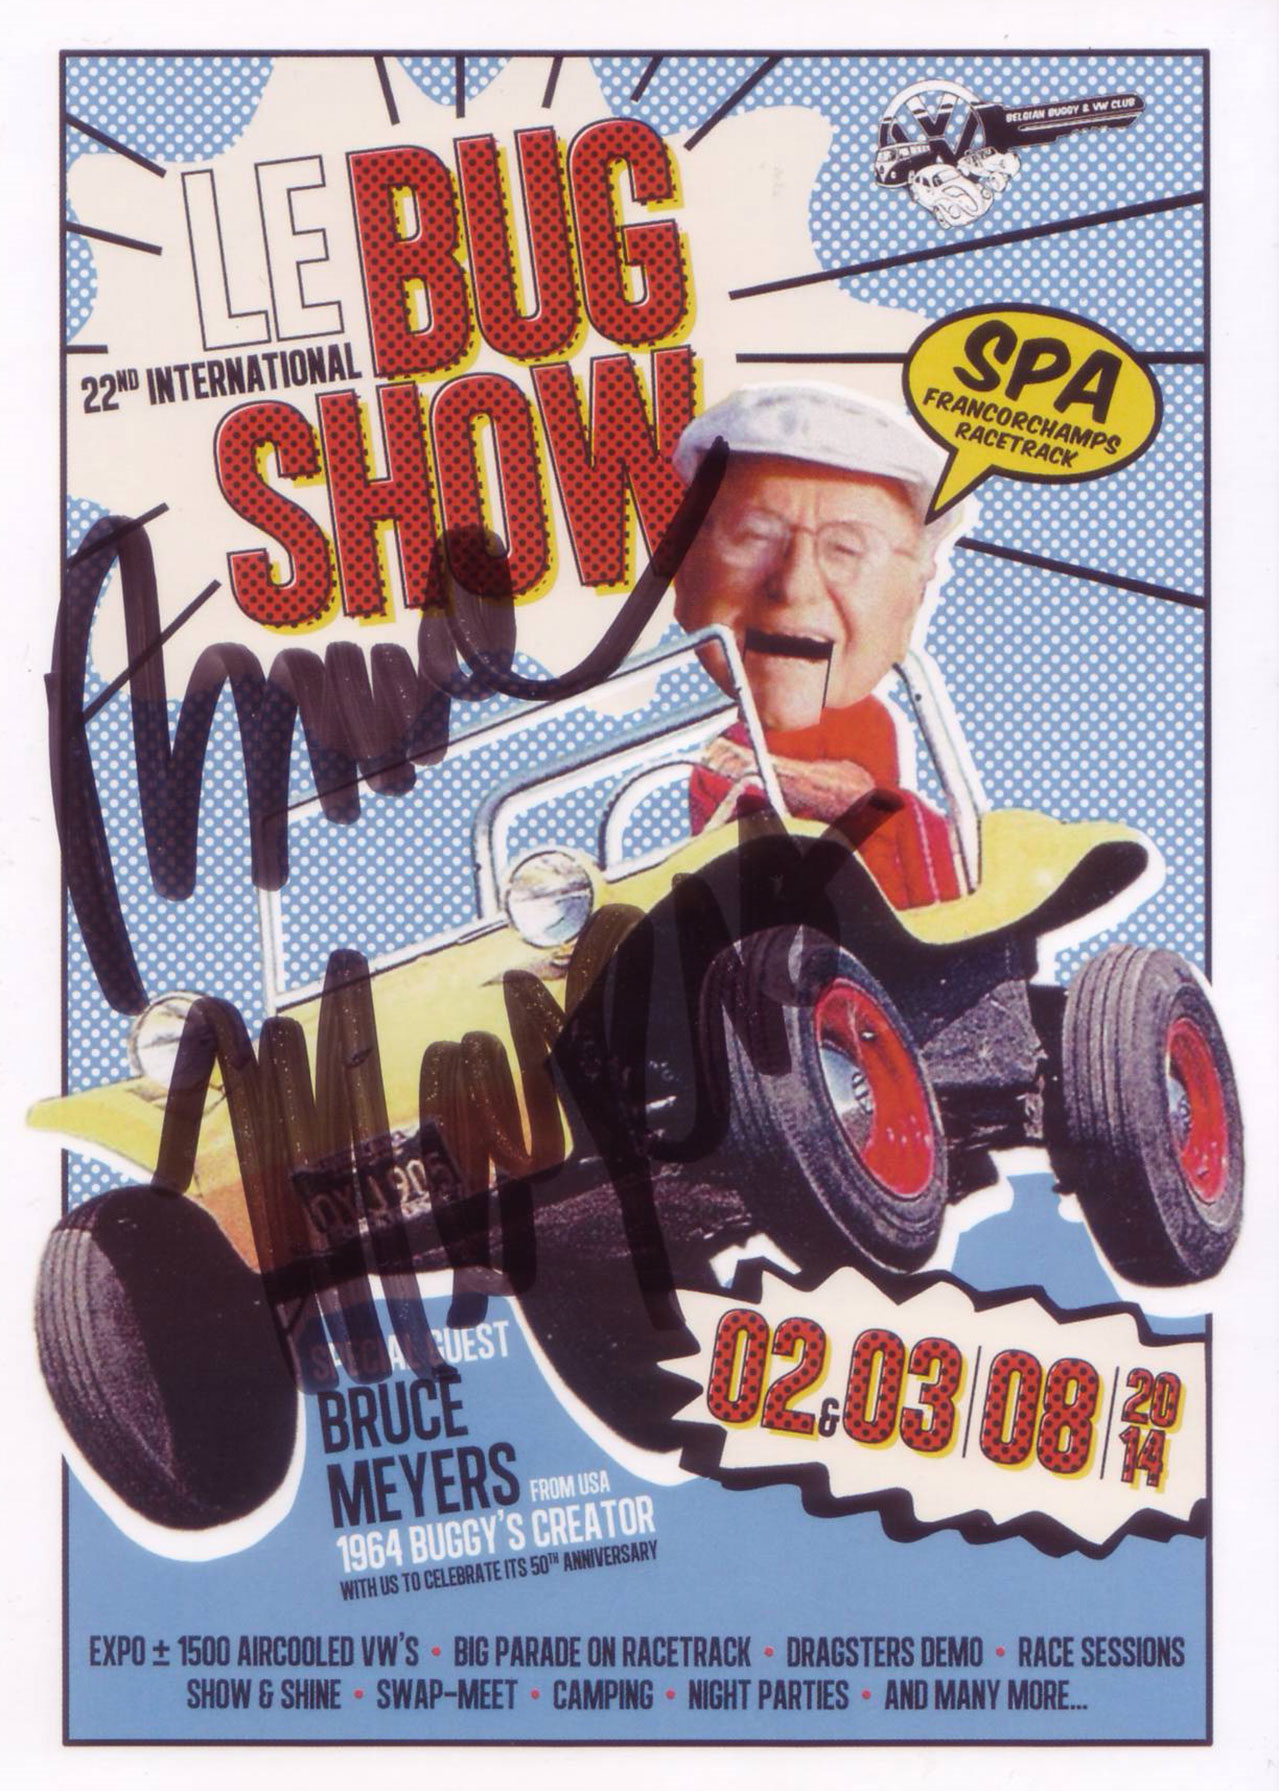 Le bug show Spa 2014 Flyer with Bruce Meyers signature